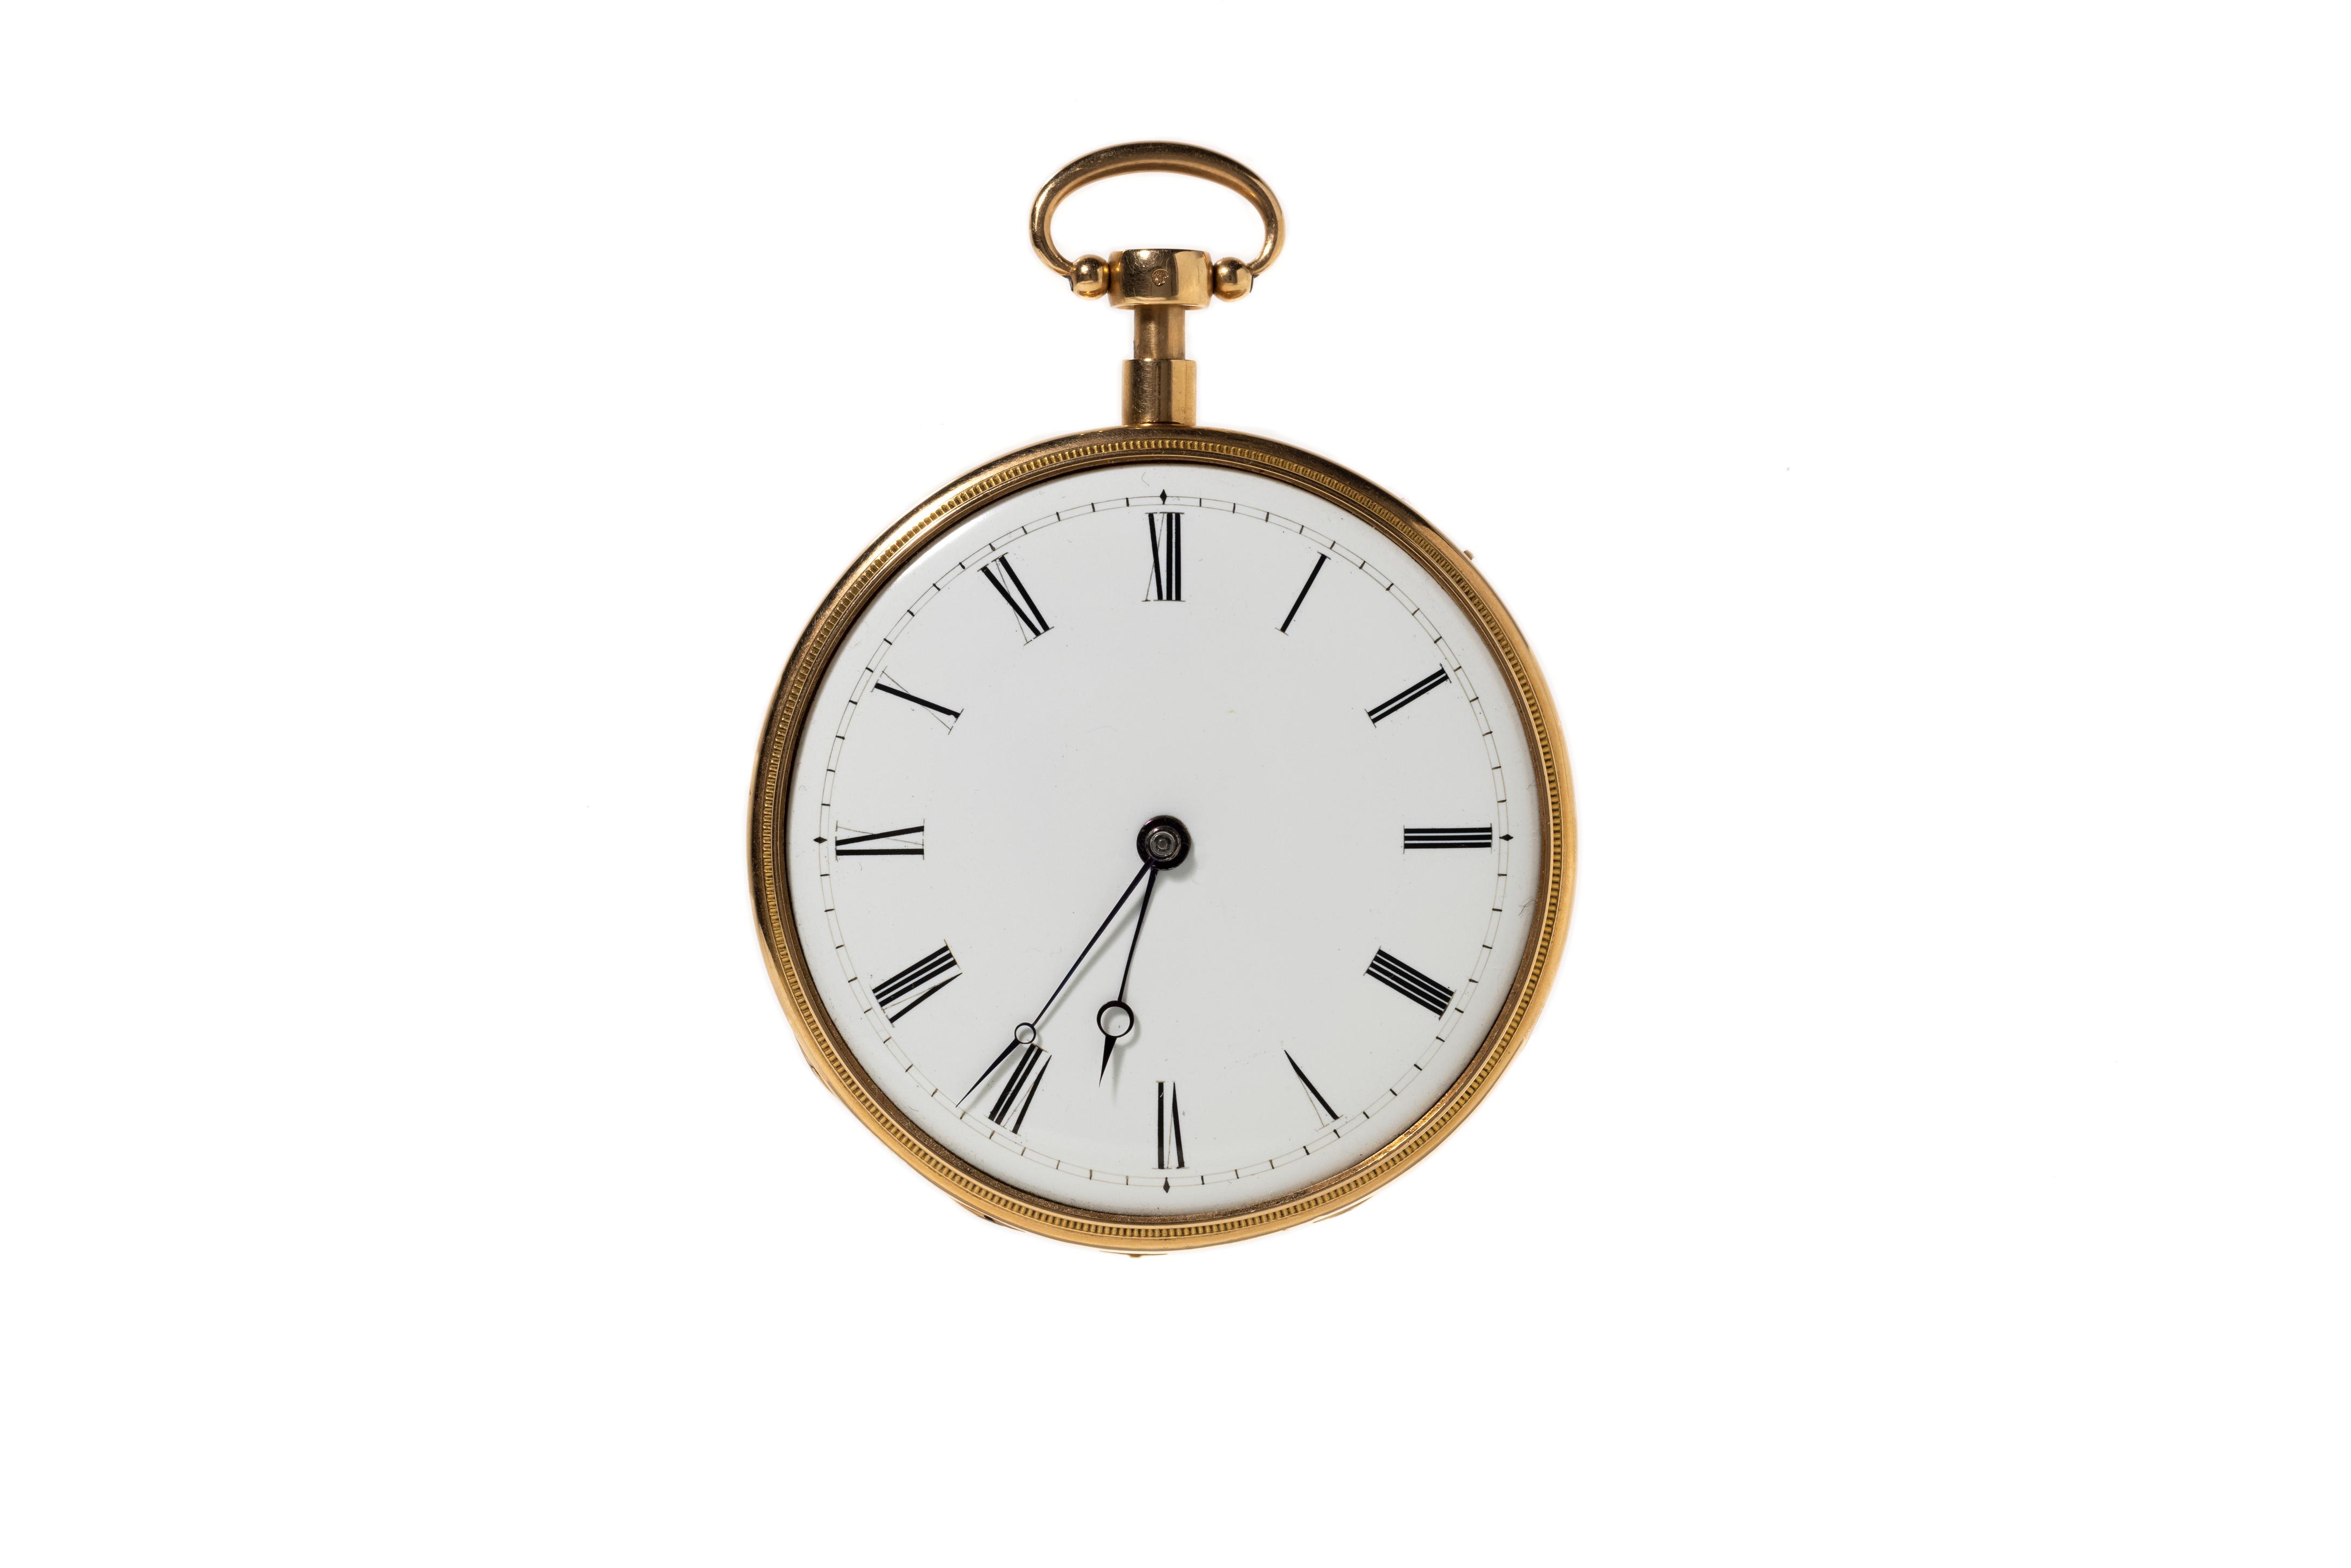 A rose gold pocket watch with a Roman numeral face on a white background